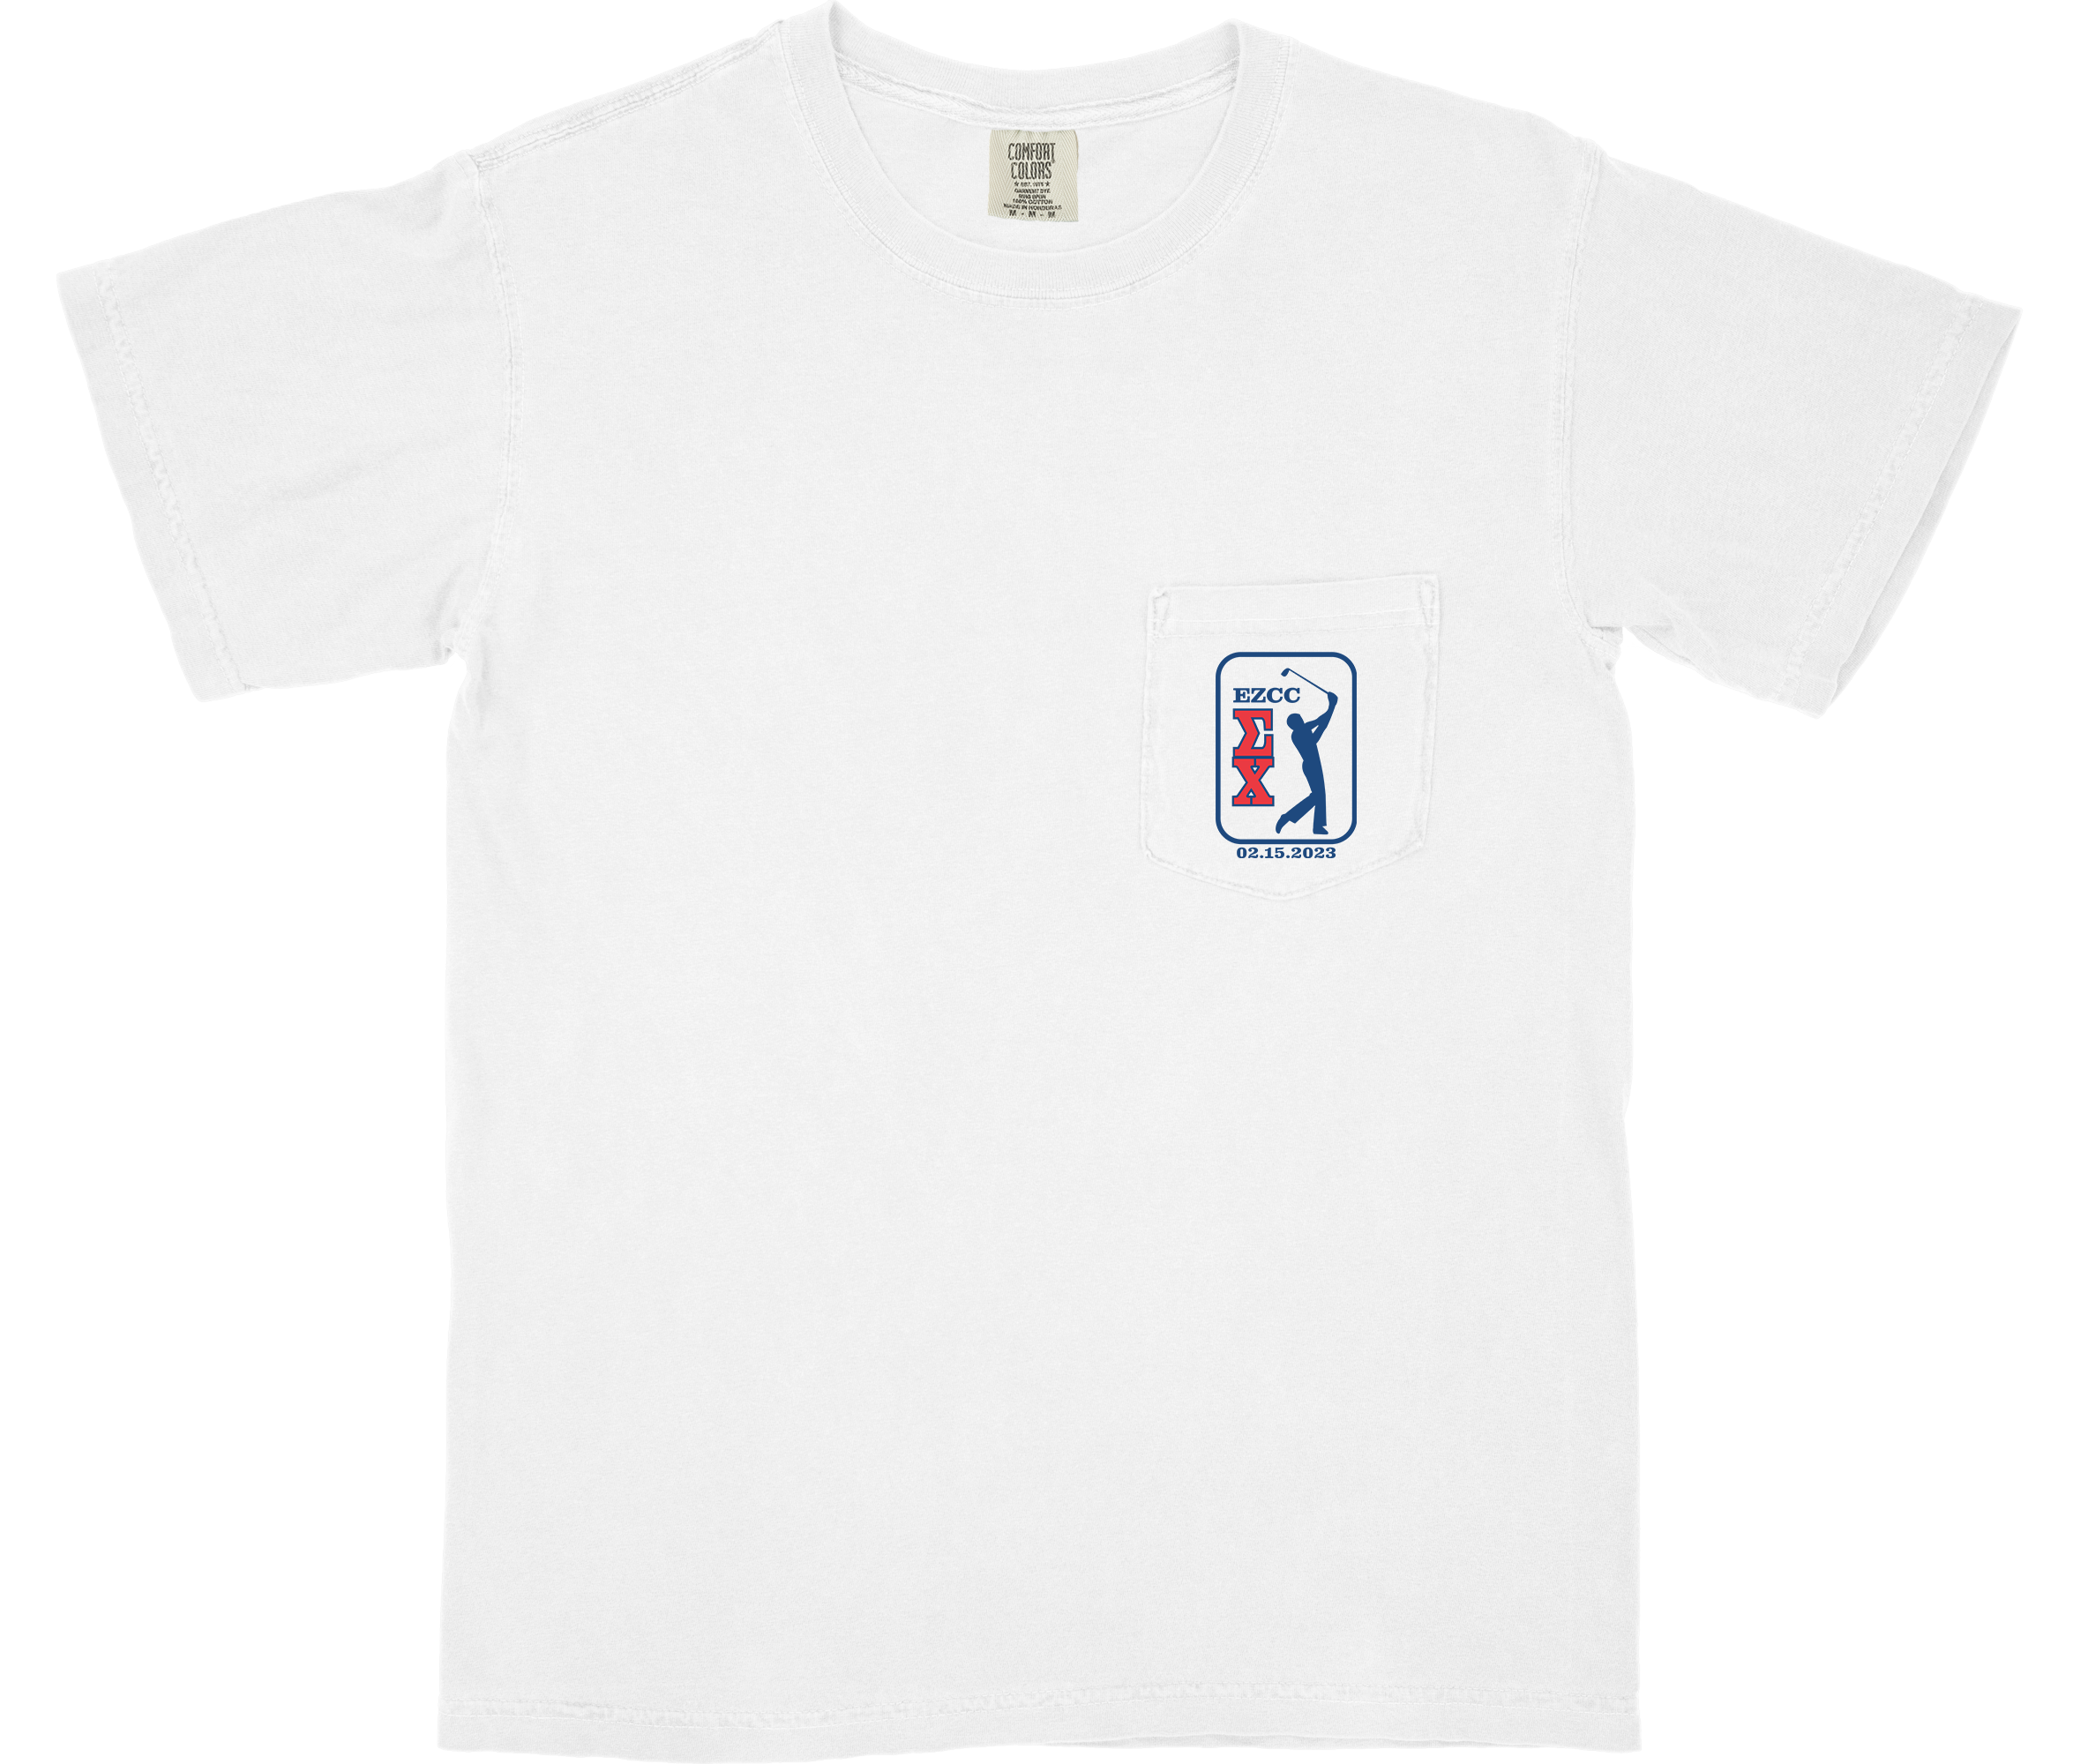 FedEx Cup Date Function Shirt